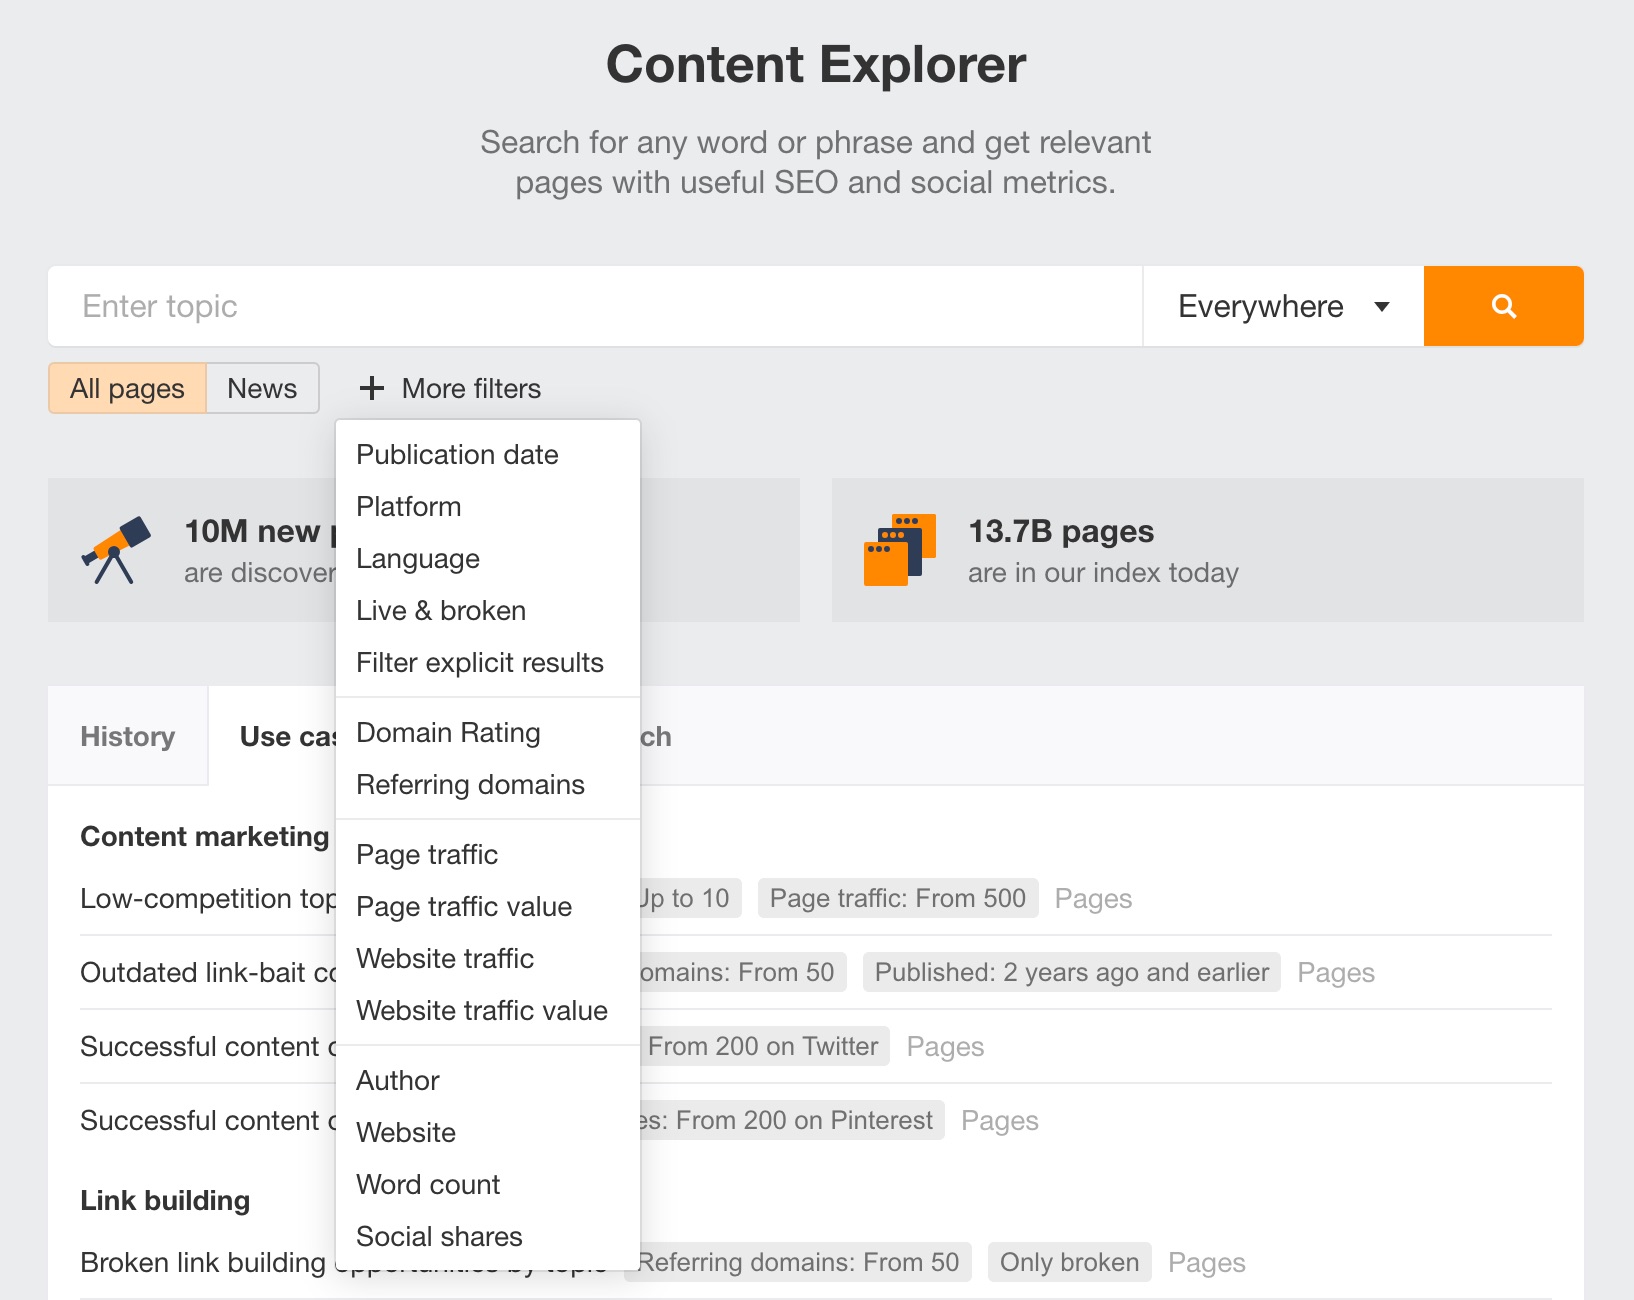 Primary filters on landing page of Content Explorer